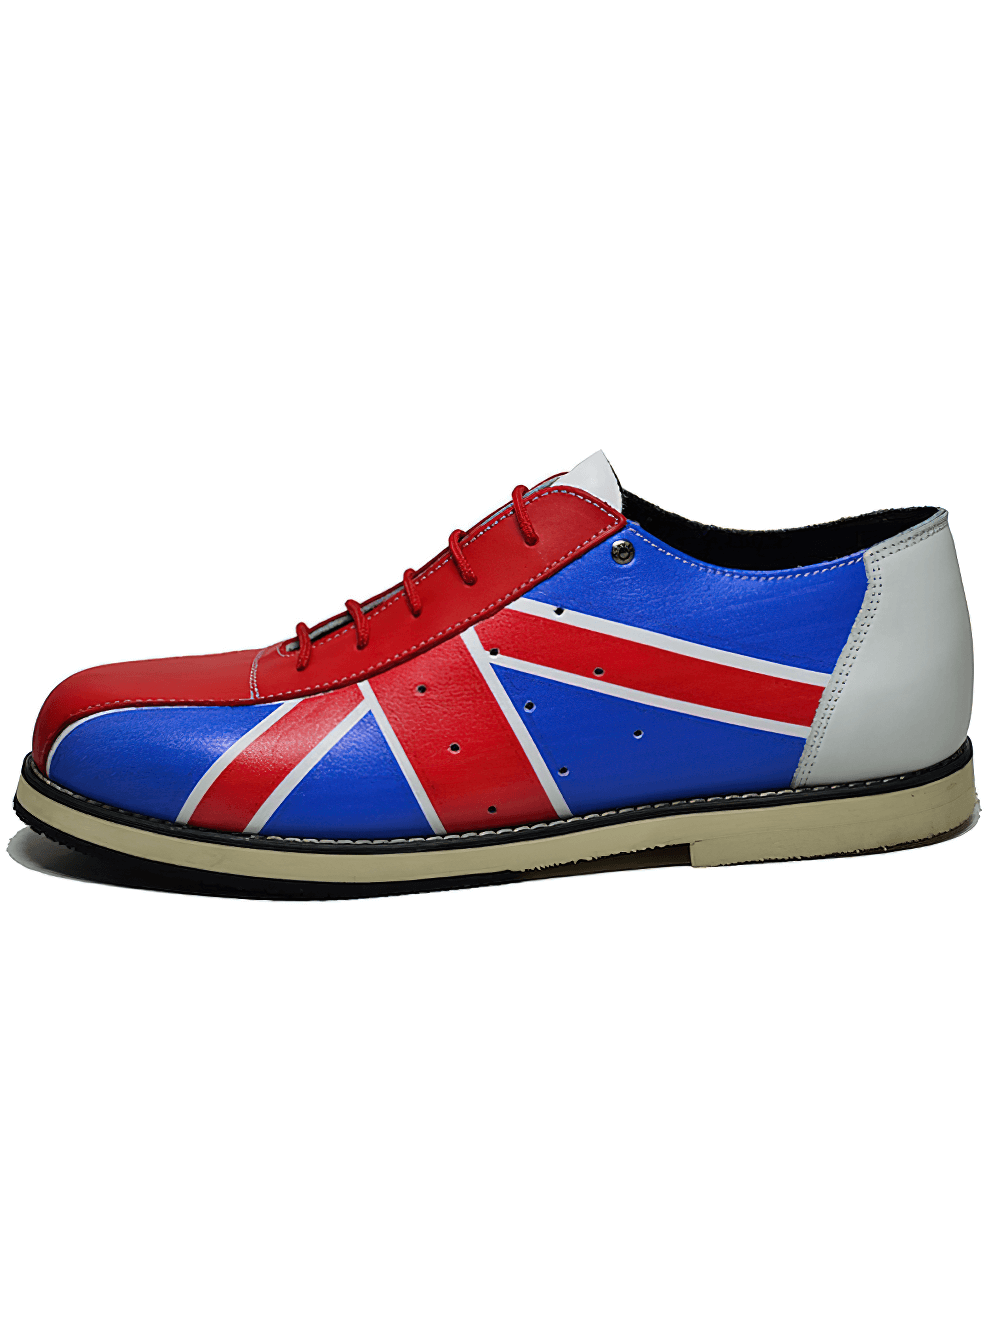 Blue-Red Union Jack Bowling Shoes in Grained Leather